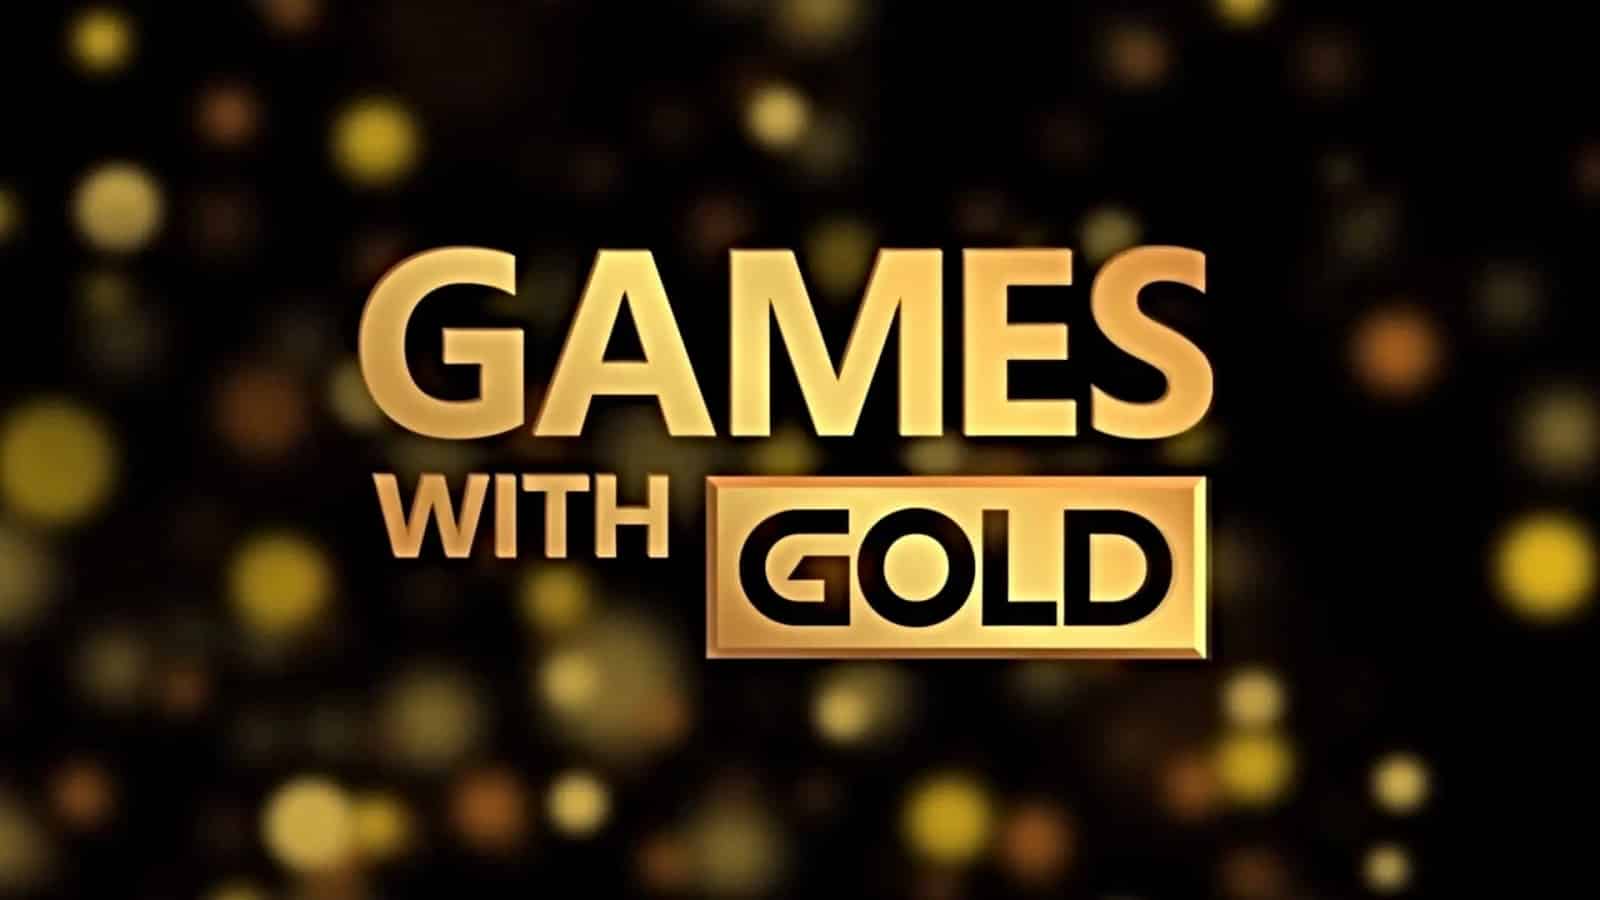 games with gold no longer to include xbox 360 games